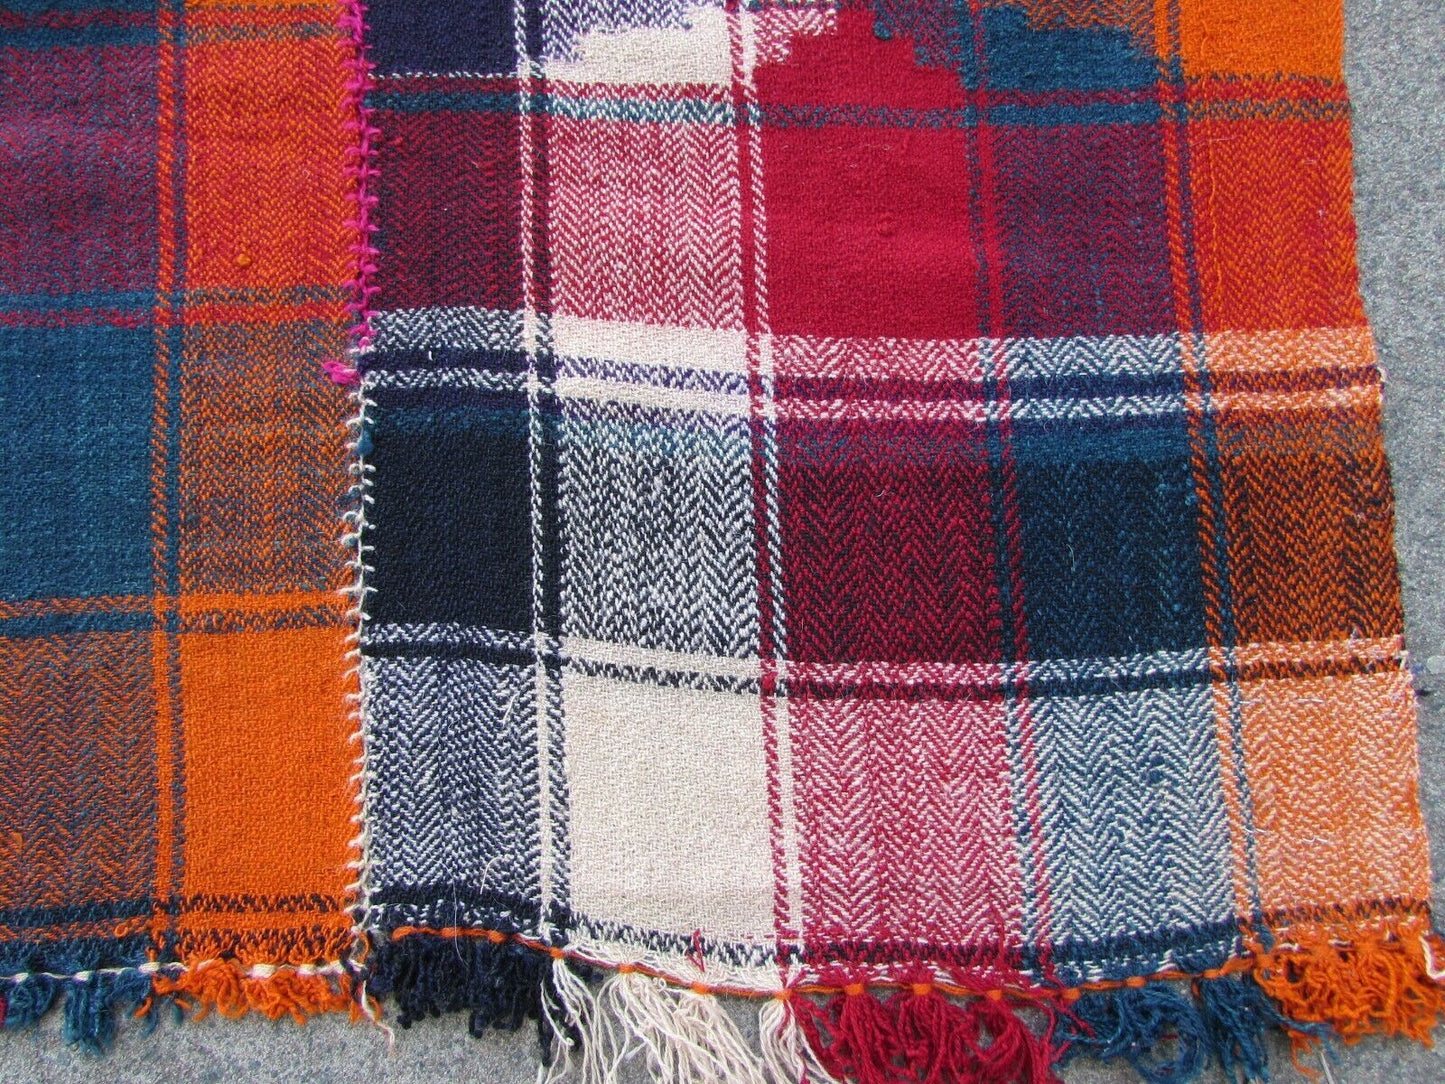 Handmade vintage Persian Moj kilim in colorful shades made in stripes. The Moj is made as a throw, usually made from two or few narrower piece, nearly identical (you able to undo the joint in middle and use it as a curtain) one of the panel is shorter than others. The Moj is crooked and is not perfectly rectangular or evenly straight due to being handmade.